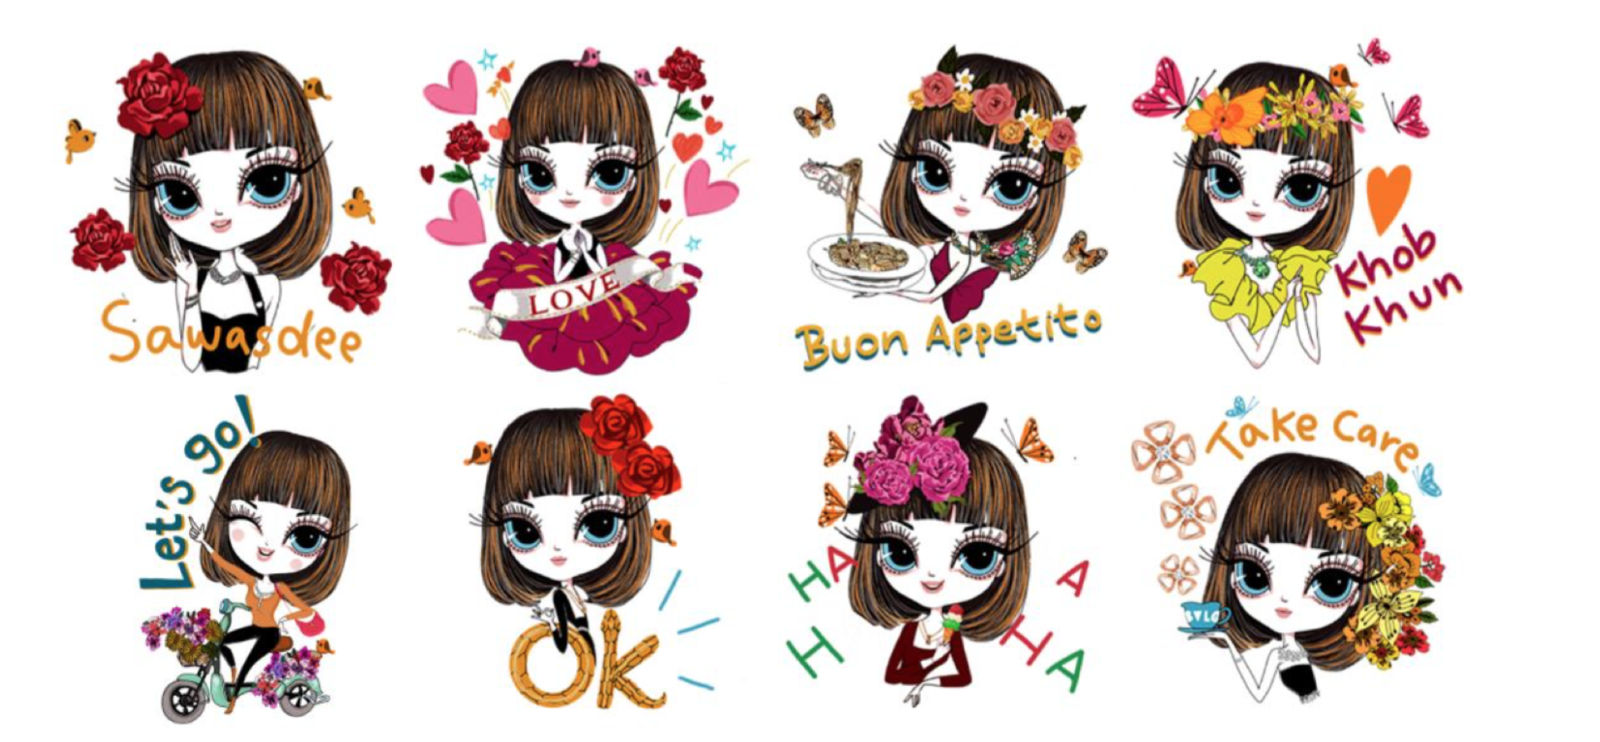 Jazz up your LINE chats with these new stickers from Bulgari